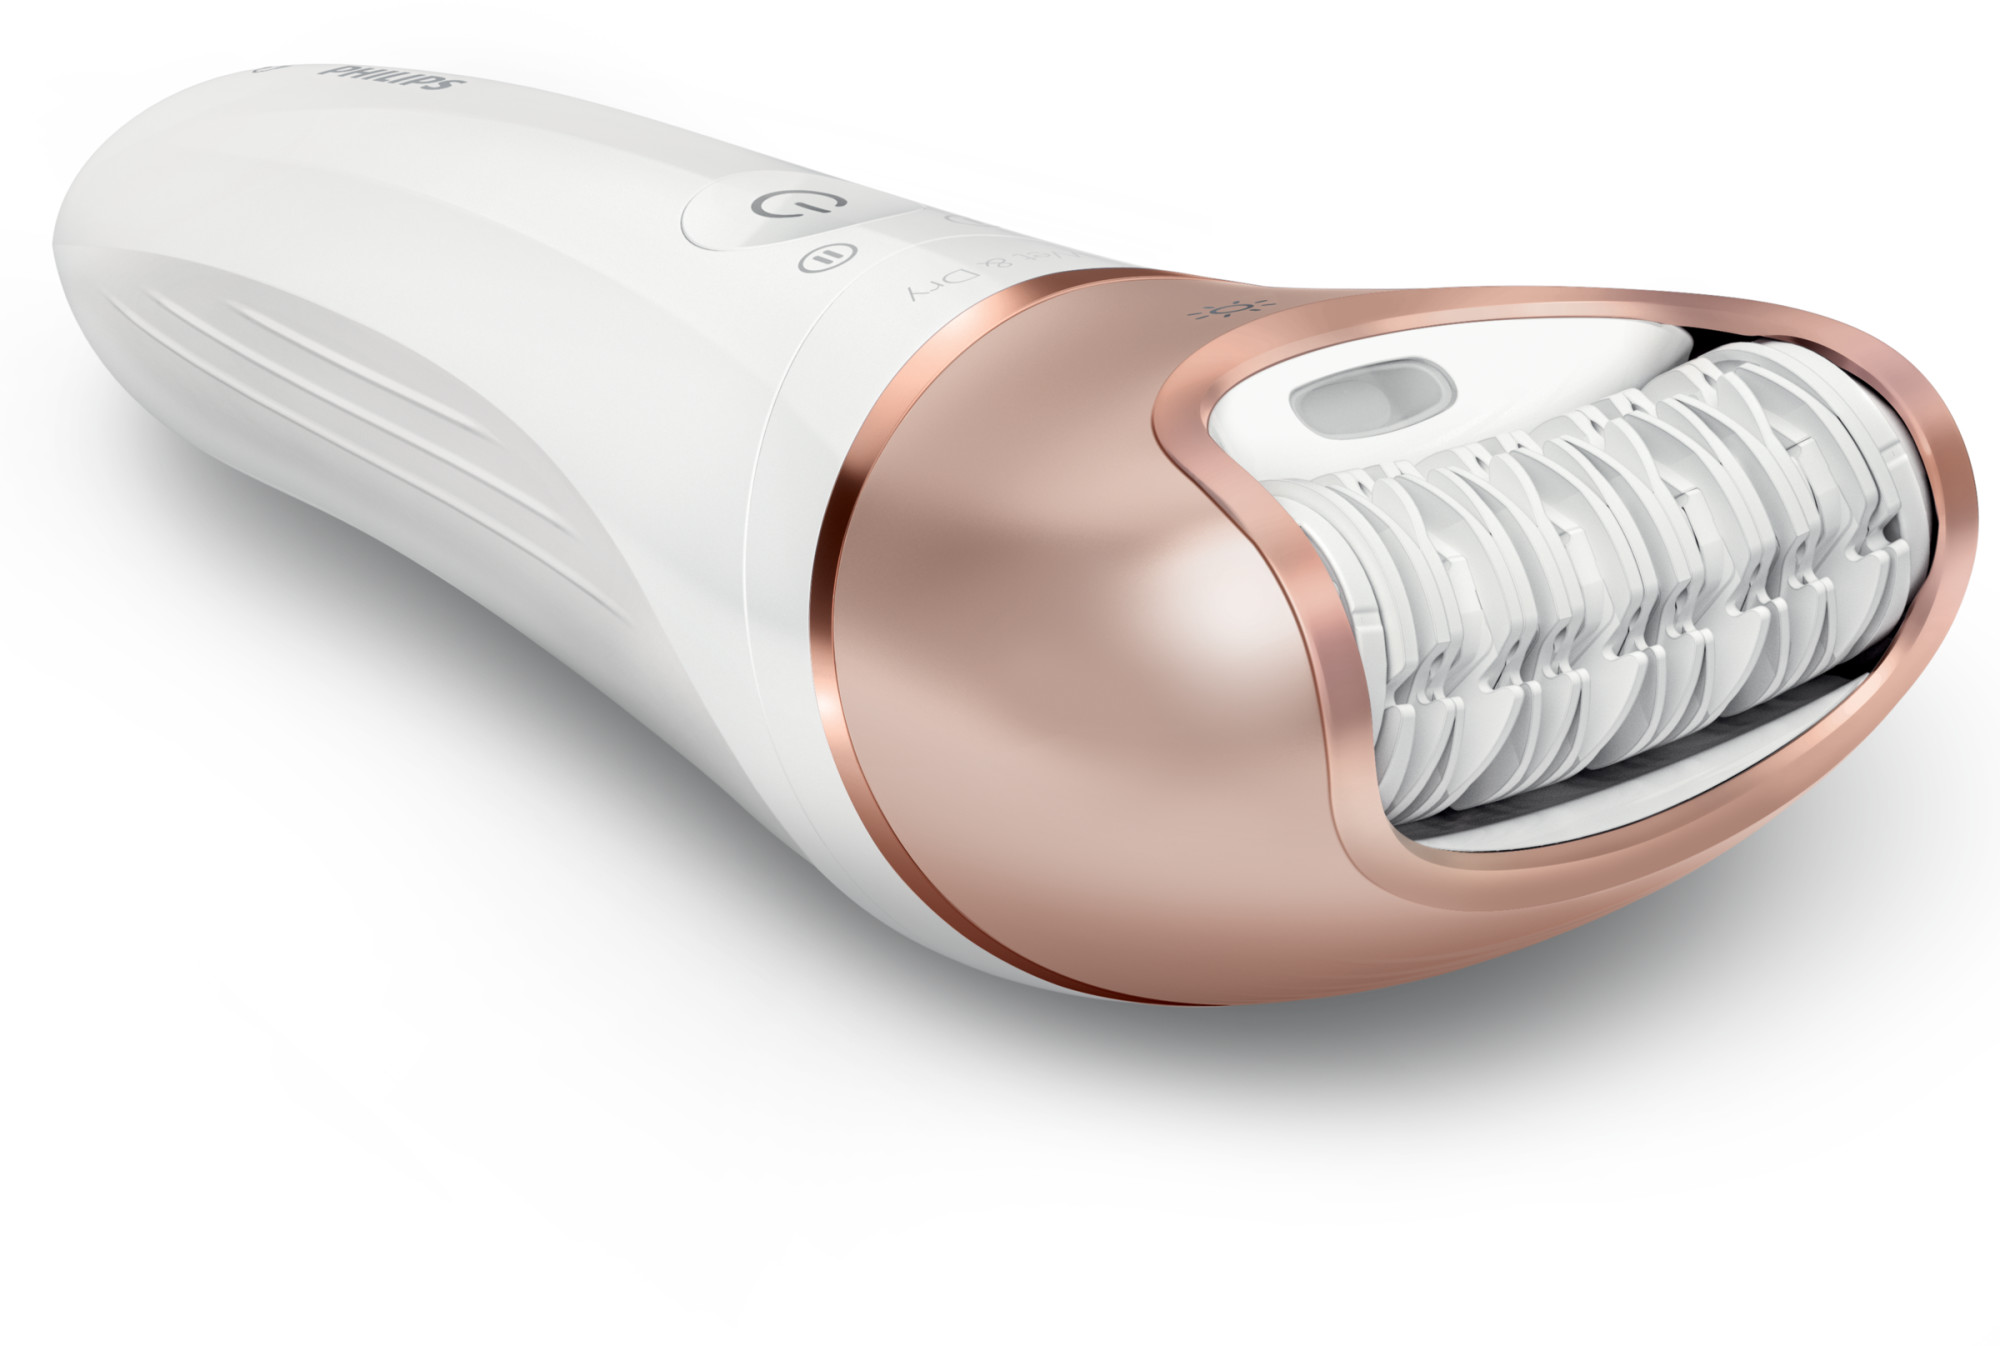 Philips Satinelle Prestige Epilator, Wet & Dry Electric Hair Removal, Body Exfoliation and Massage (Bre648) - image 4 of 14